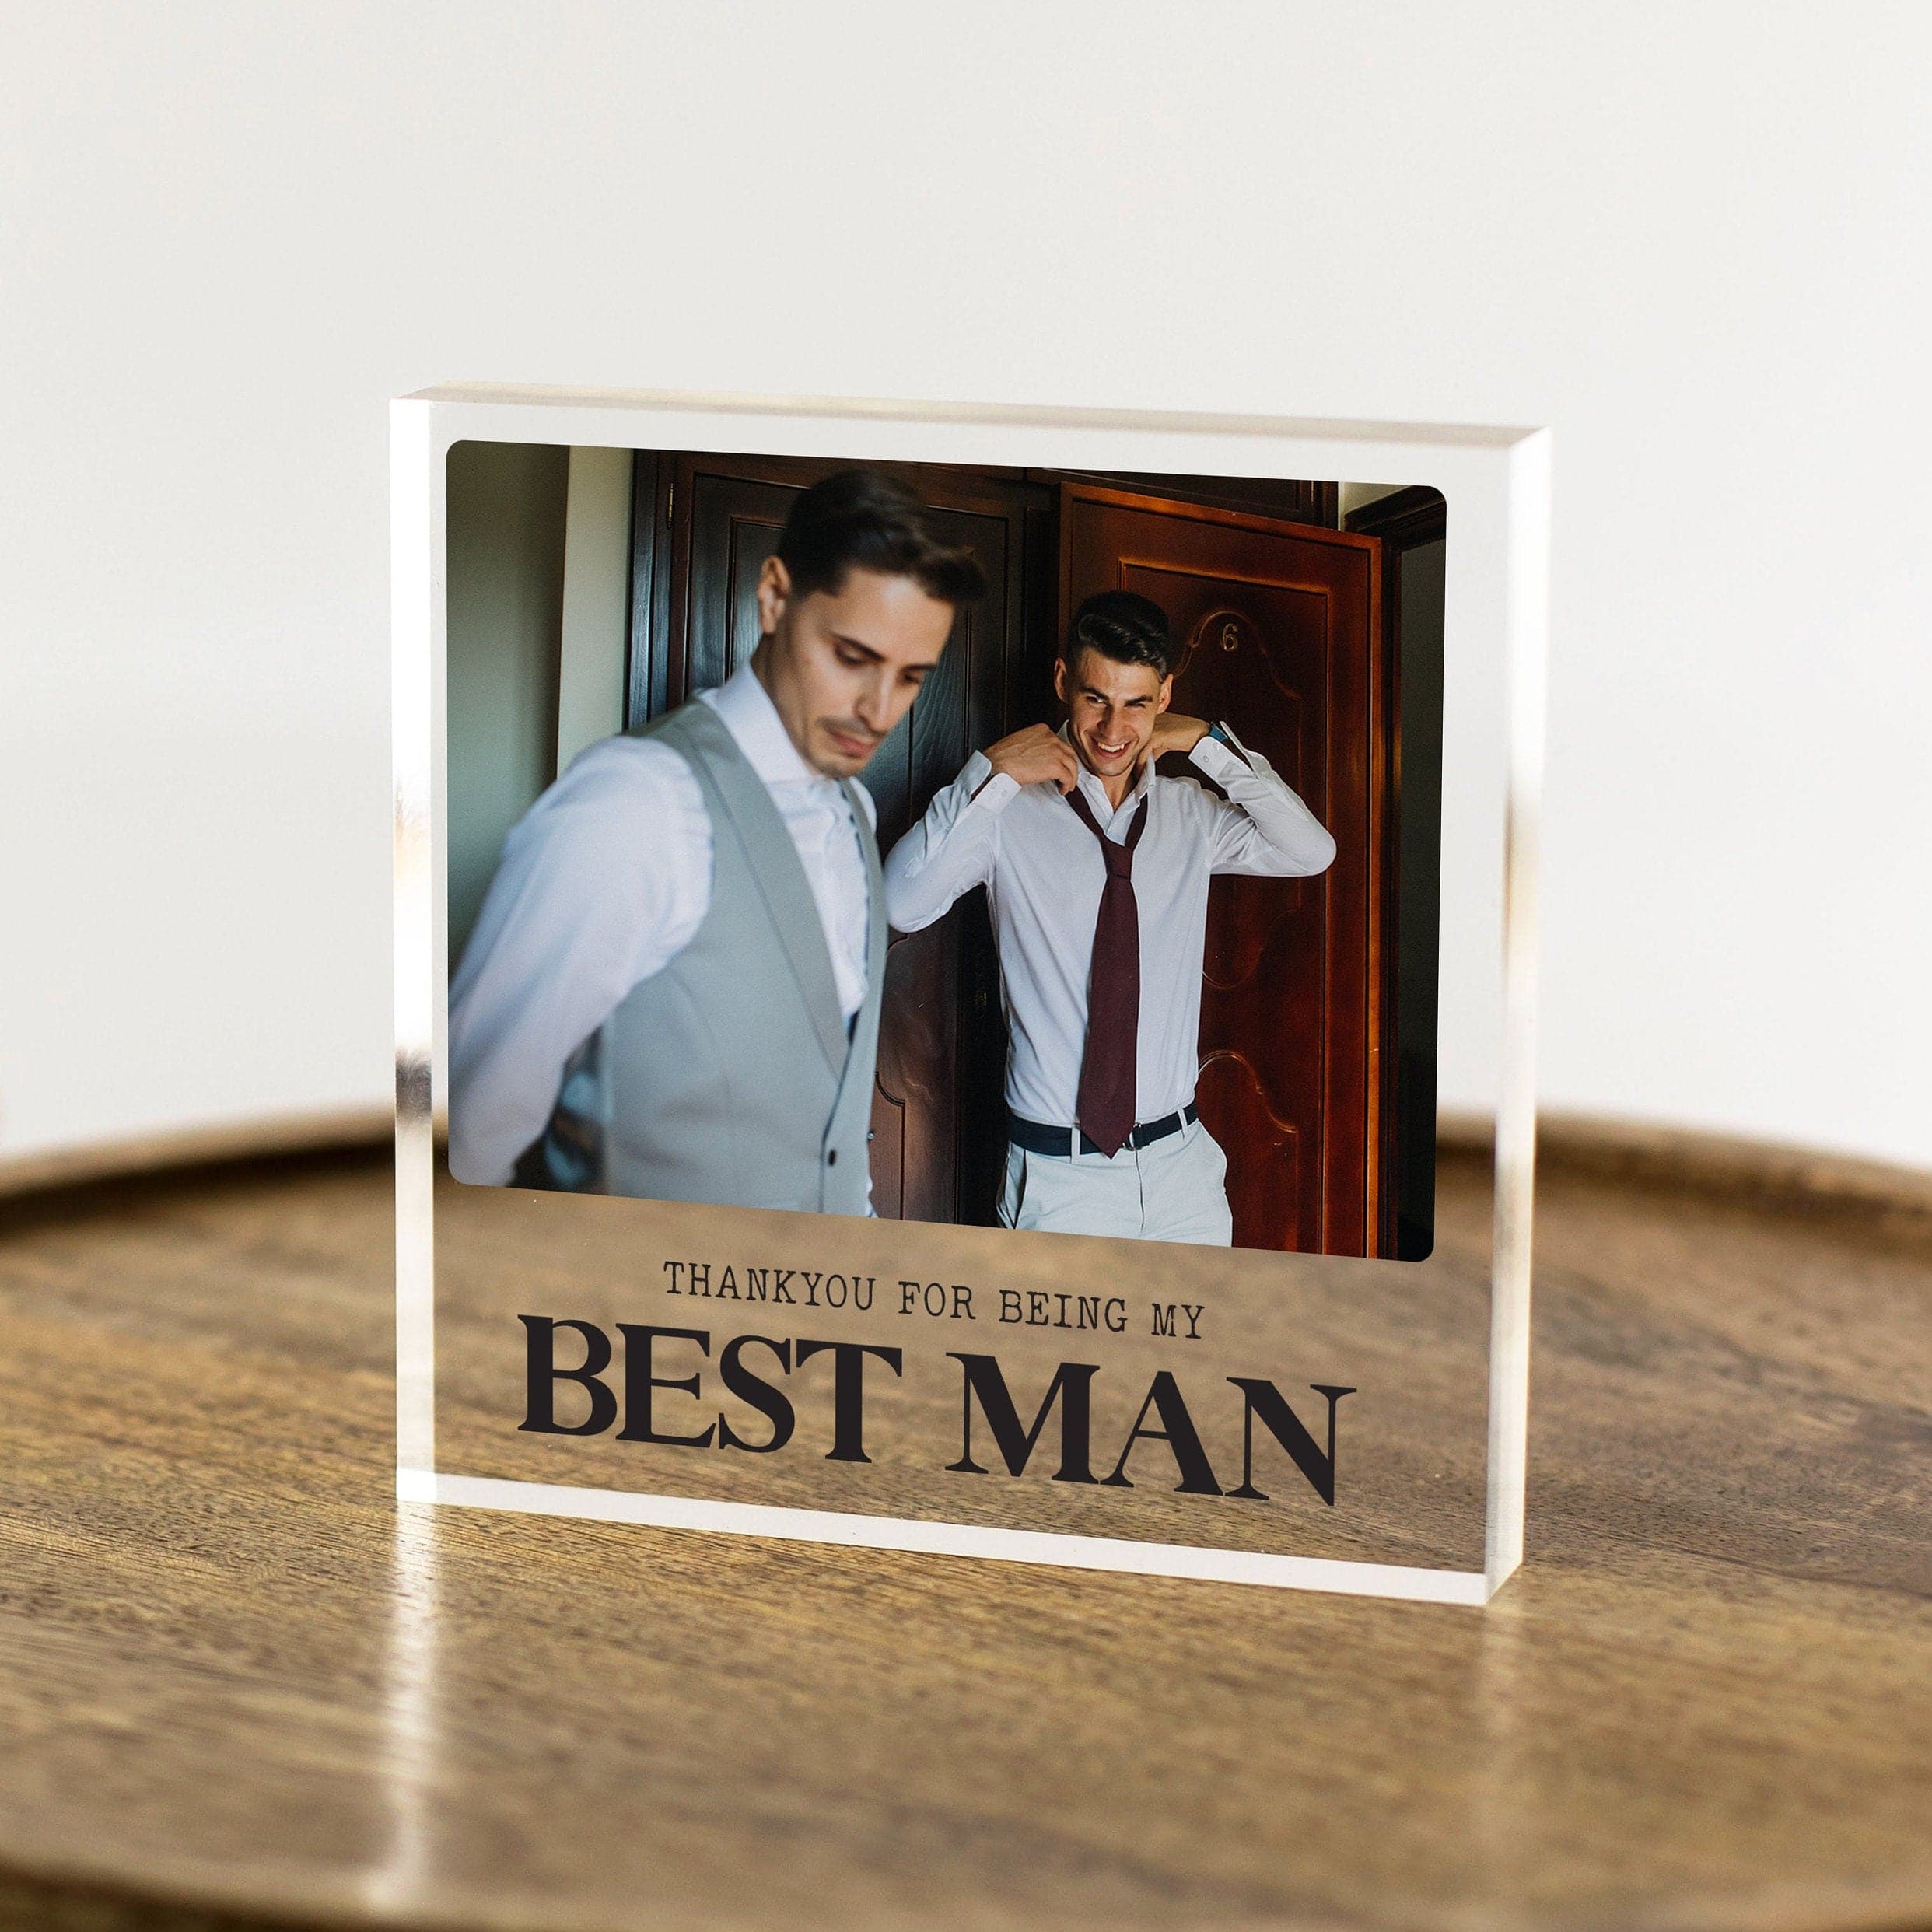 Best Man Gifts, Groomsman Gift, Wedding Party Gift, Photo Block, Thank you Gift, Unique Groomsmen Gift, Gifts for Men, Father of the Groom